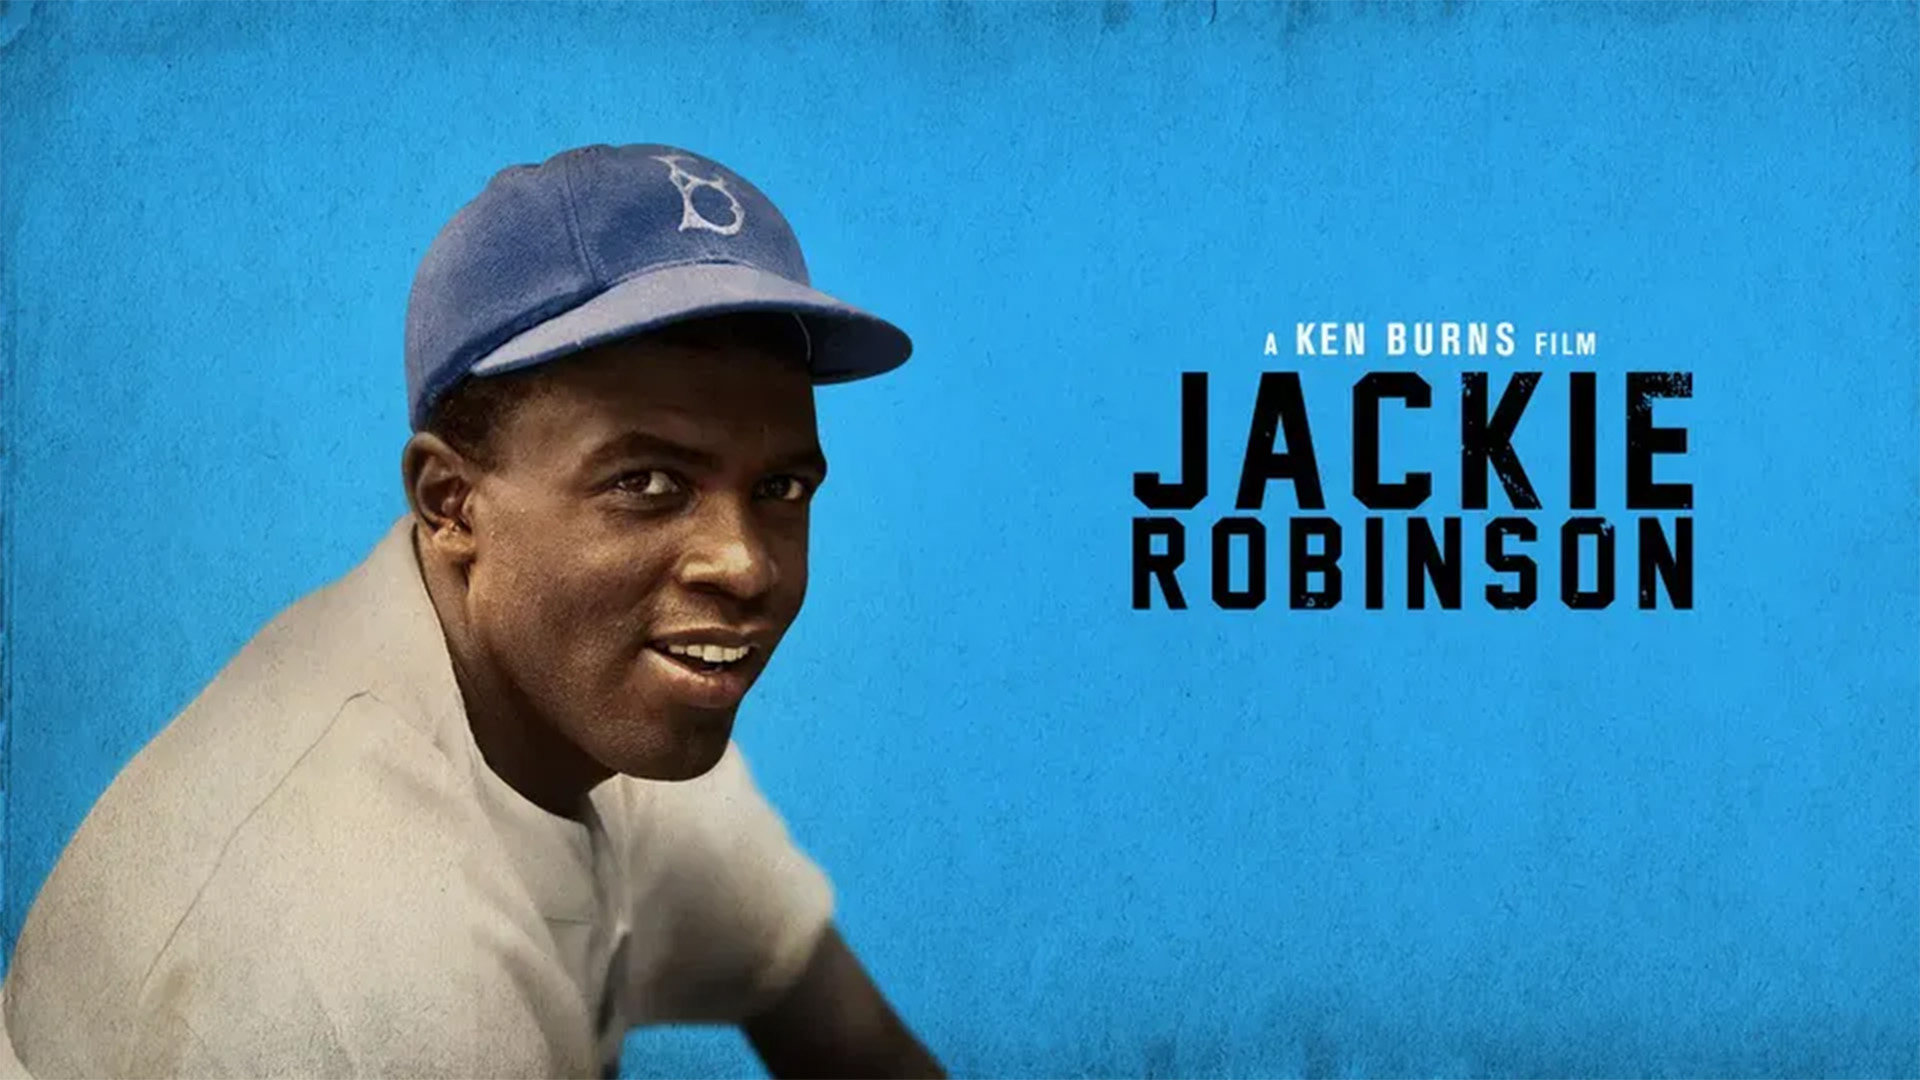 Jackie Robinson wearing a Brooklyn Dodgers baseball uniform and 'B' hat with title of film on right-hand side.